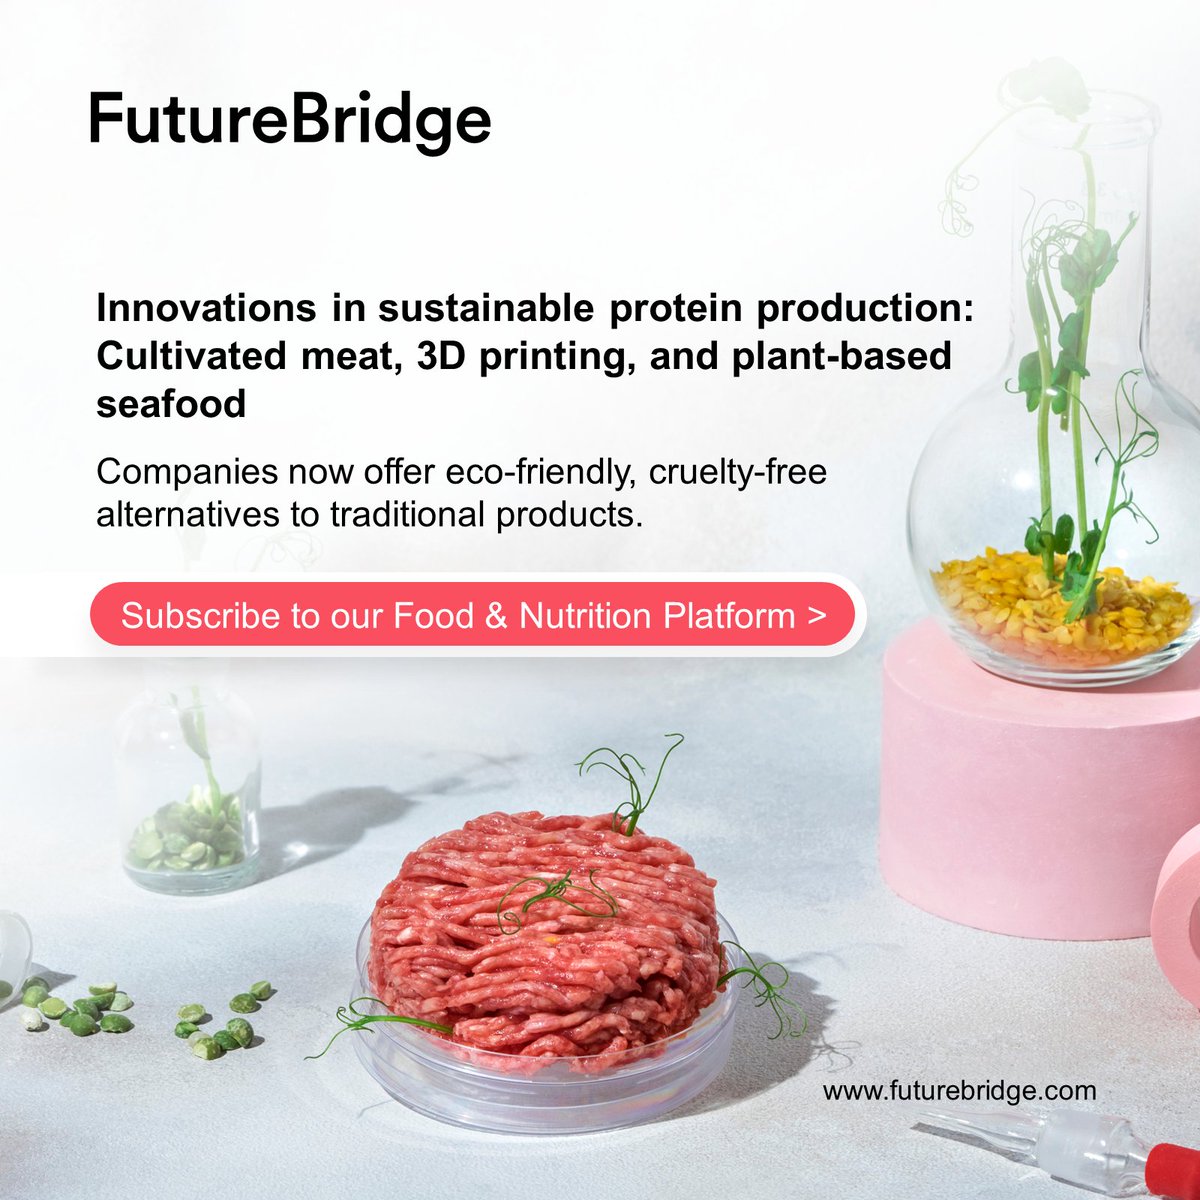 Cultivated meat evolves with 3D-printed edible inks and robotic chefs. Get the full report by subscribing to our F&N platform here: hubs.li/Q02bsWVM0

#CultivatedMeat #SustainableProtein #FoodIndustry #FoodTech #TechForeSight